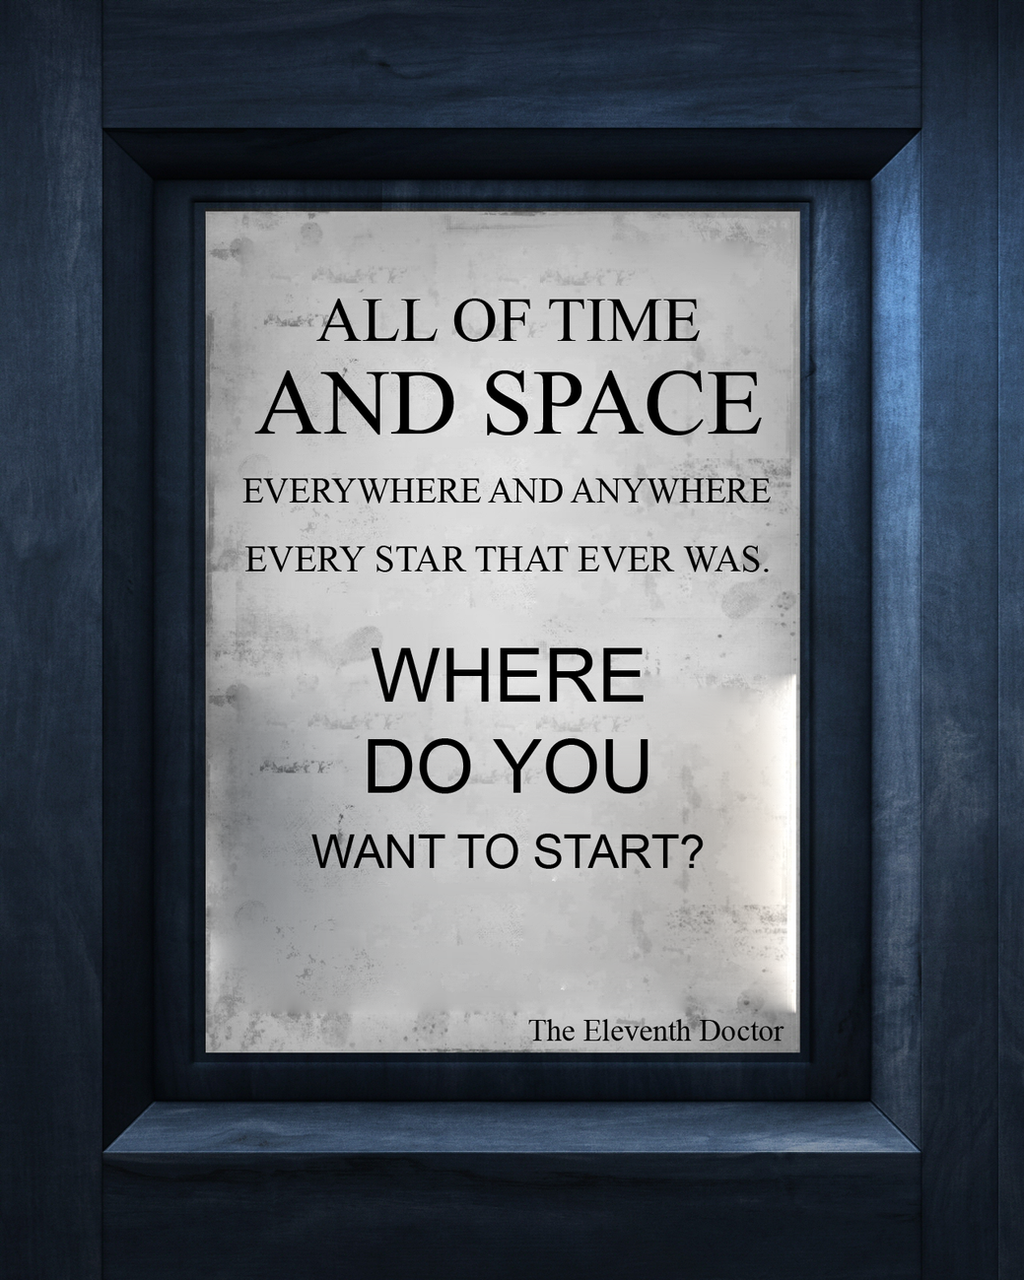 LunaHermione 55 10 All of Time and Space The Eleventh Doctor by Doctor Who Quotes